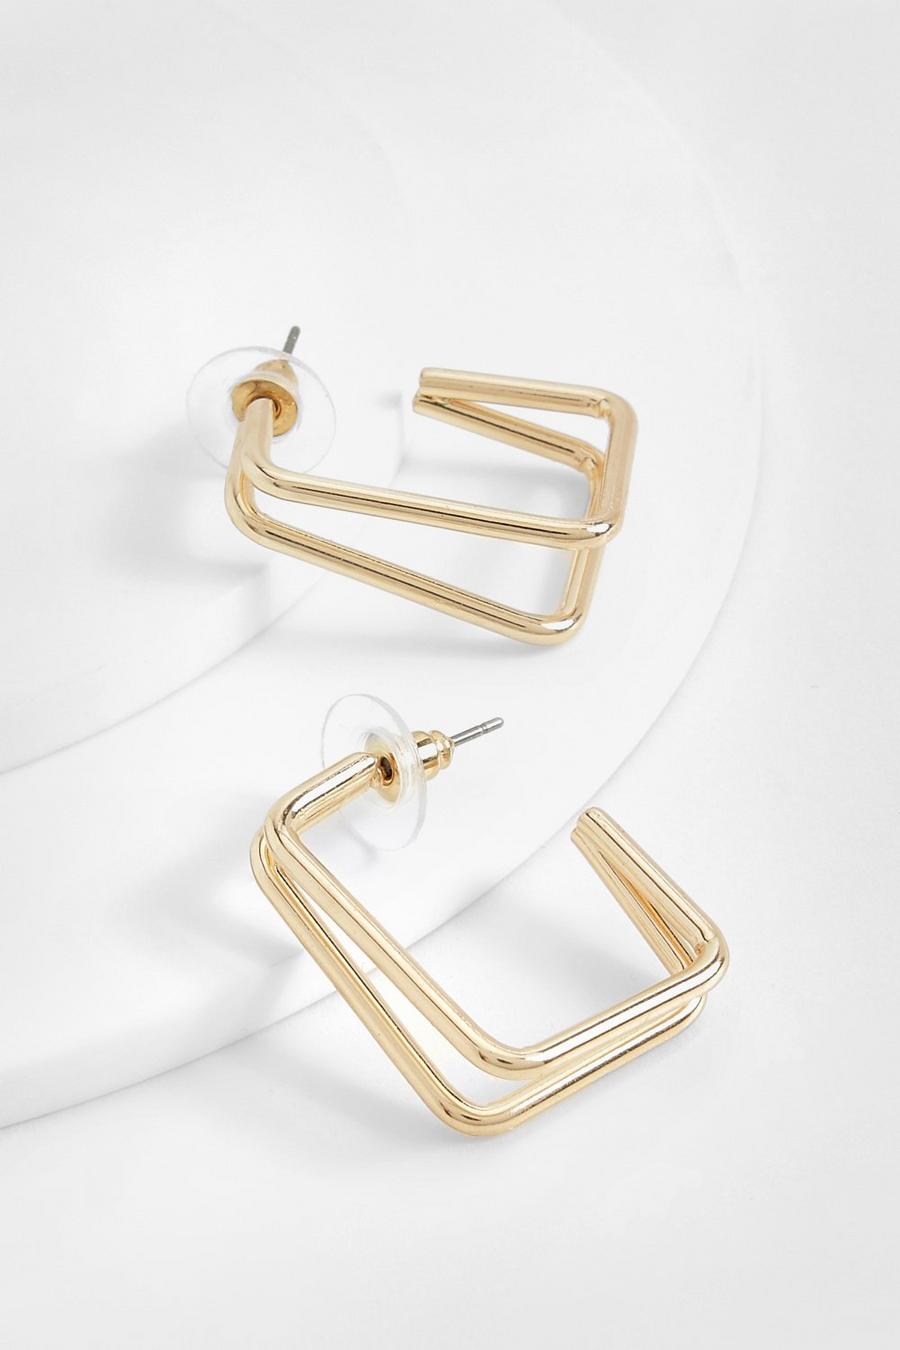 Gold Polished Square Double Row Hoop Earrings